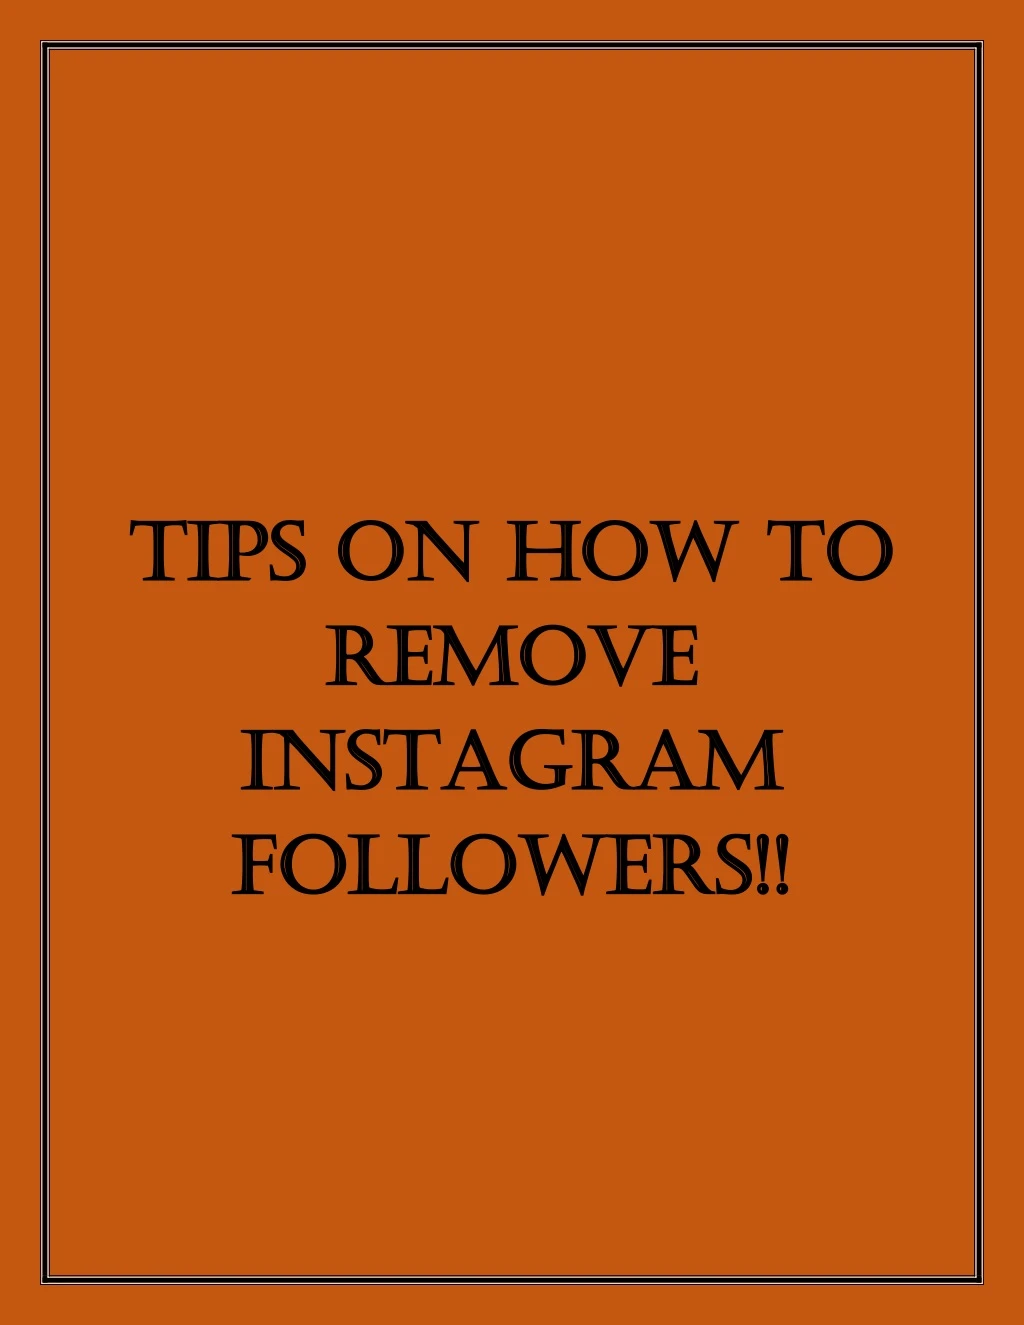 tips on how to tips on how to remove remove